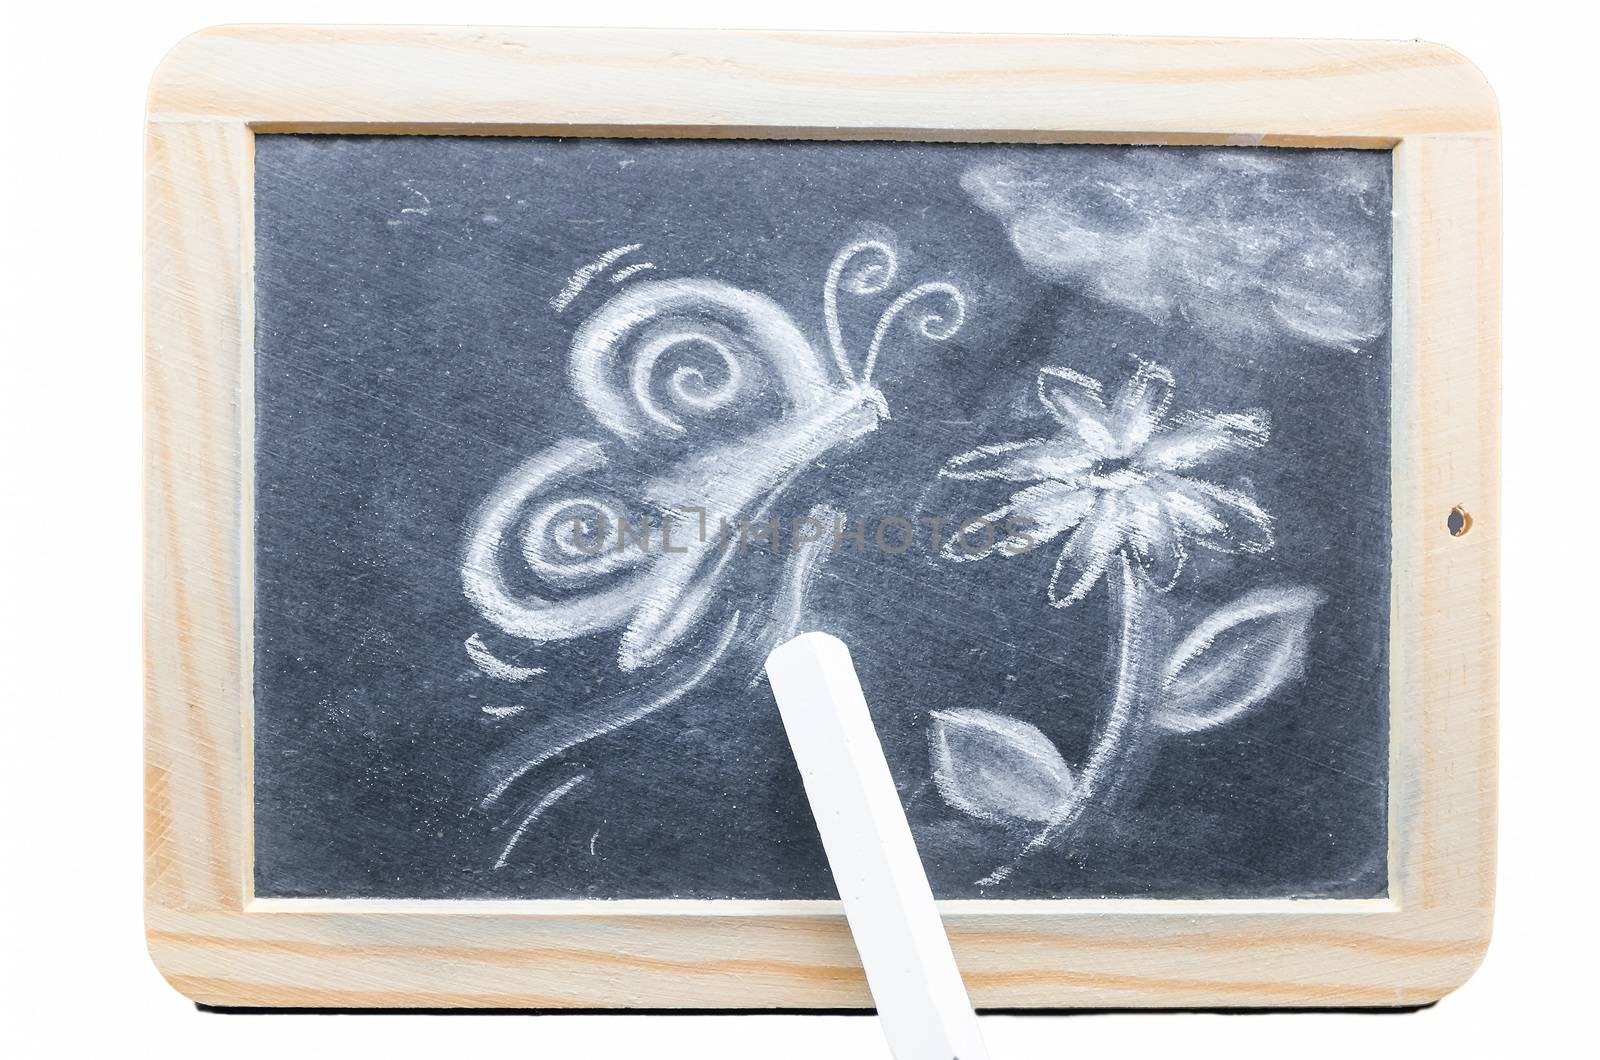 Chalk drawing by JFsPic